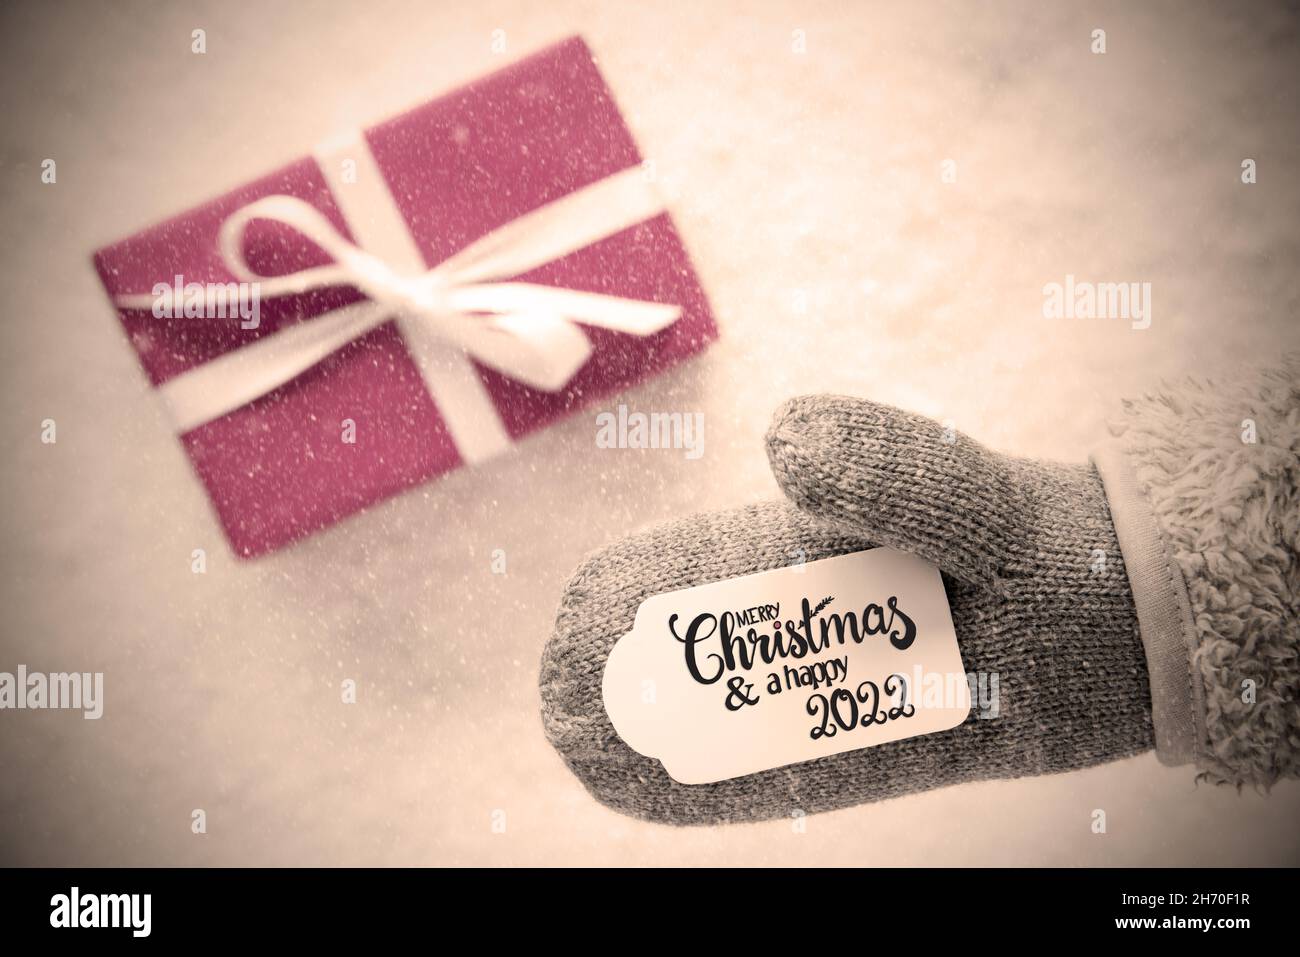 Gray Glove, Pink Gift, Label, Snowflakes, Merry Christmas And A Happy 2022 Stock Photo